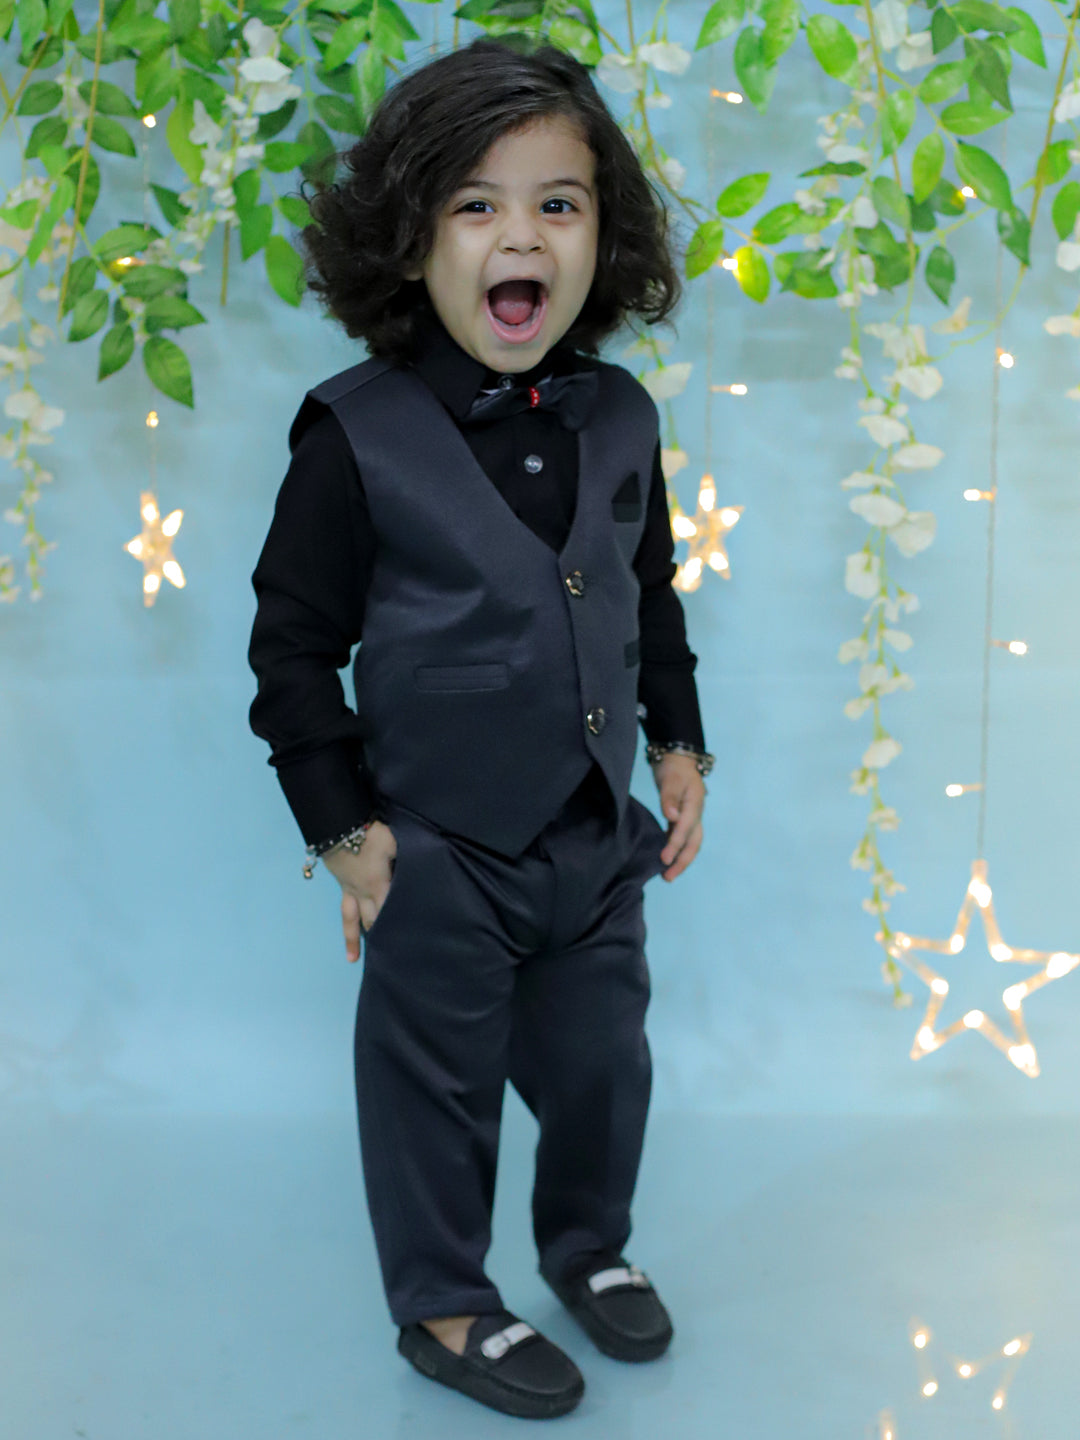 BownBee Pant Shirt with Waistcoat and Bow for Boys- Gray